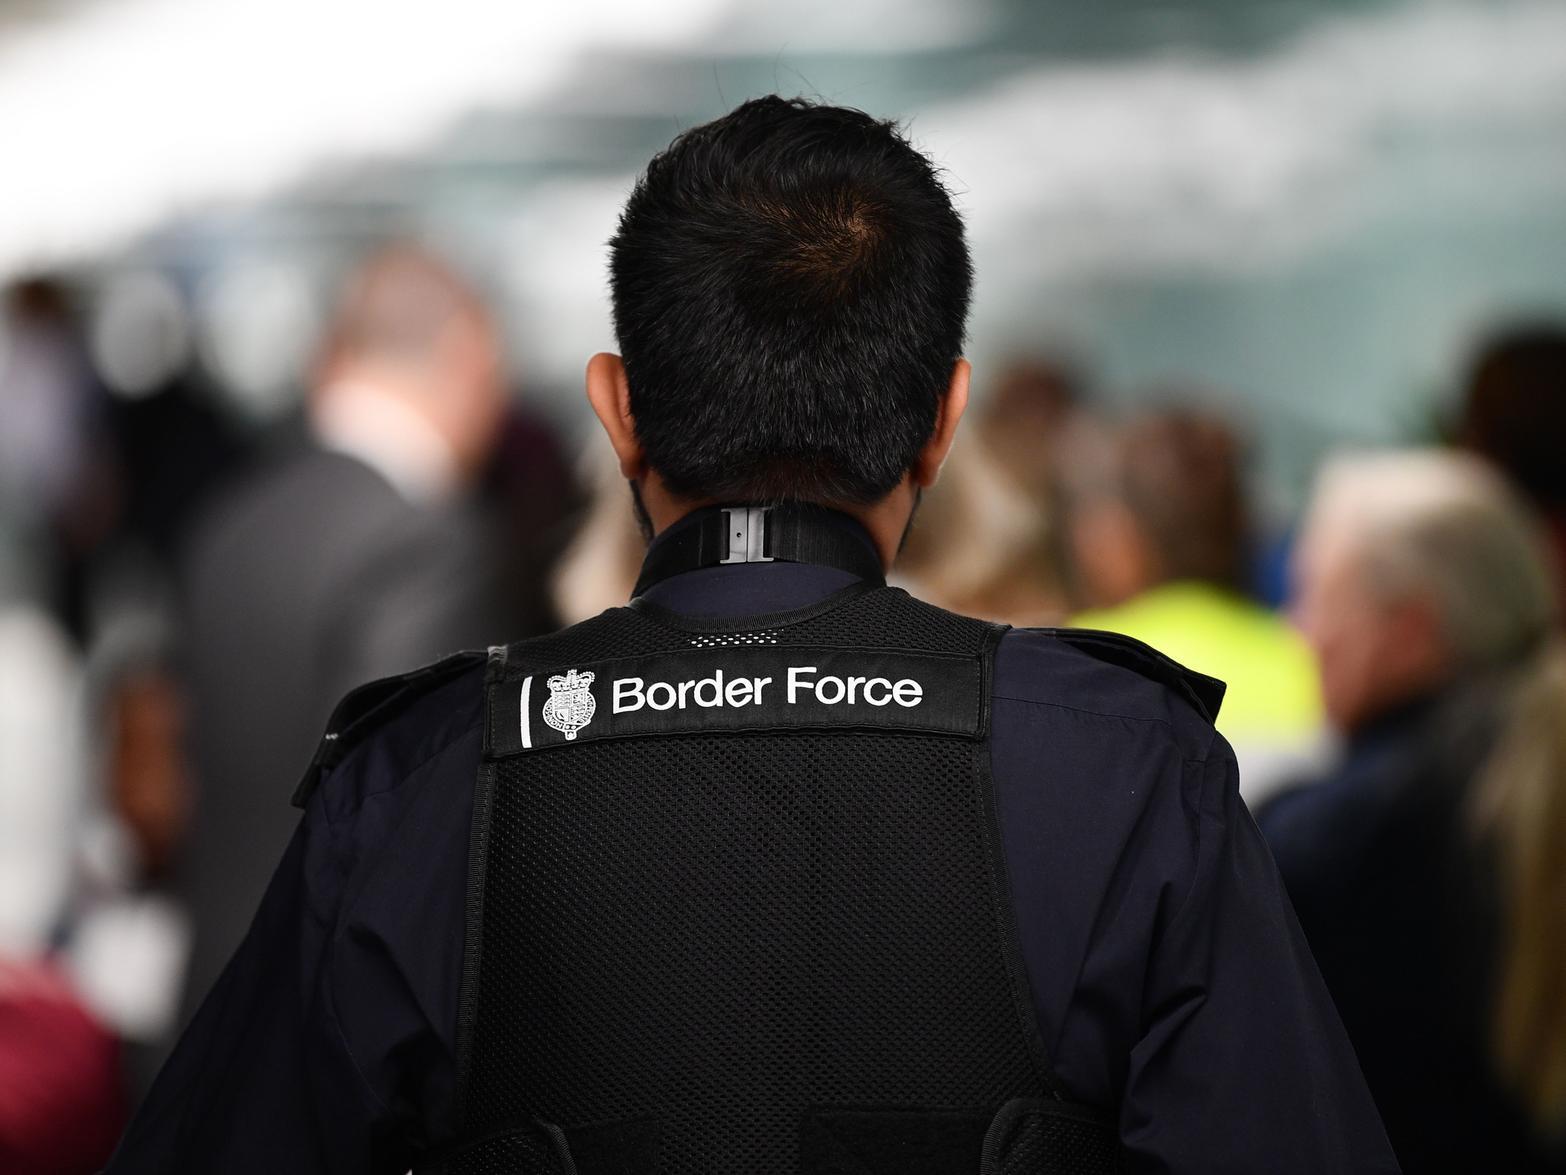 A member UK Border Force patrols at Heathrow Airport in London (Photo by DANIEL LEAL-OLIVAS/AFP via Getty Images)